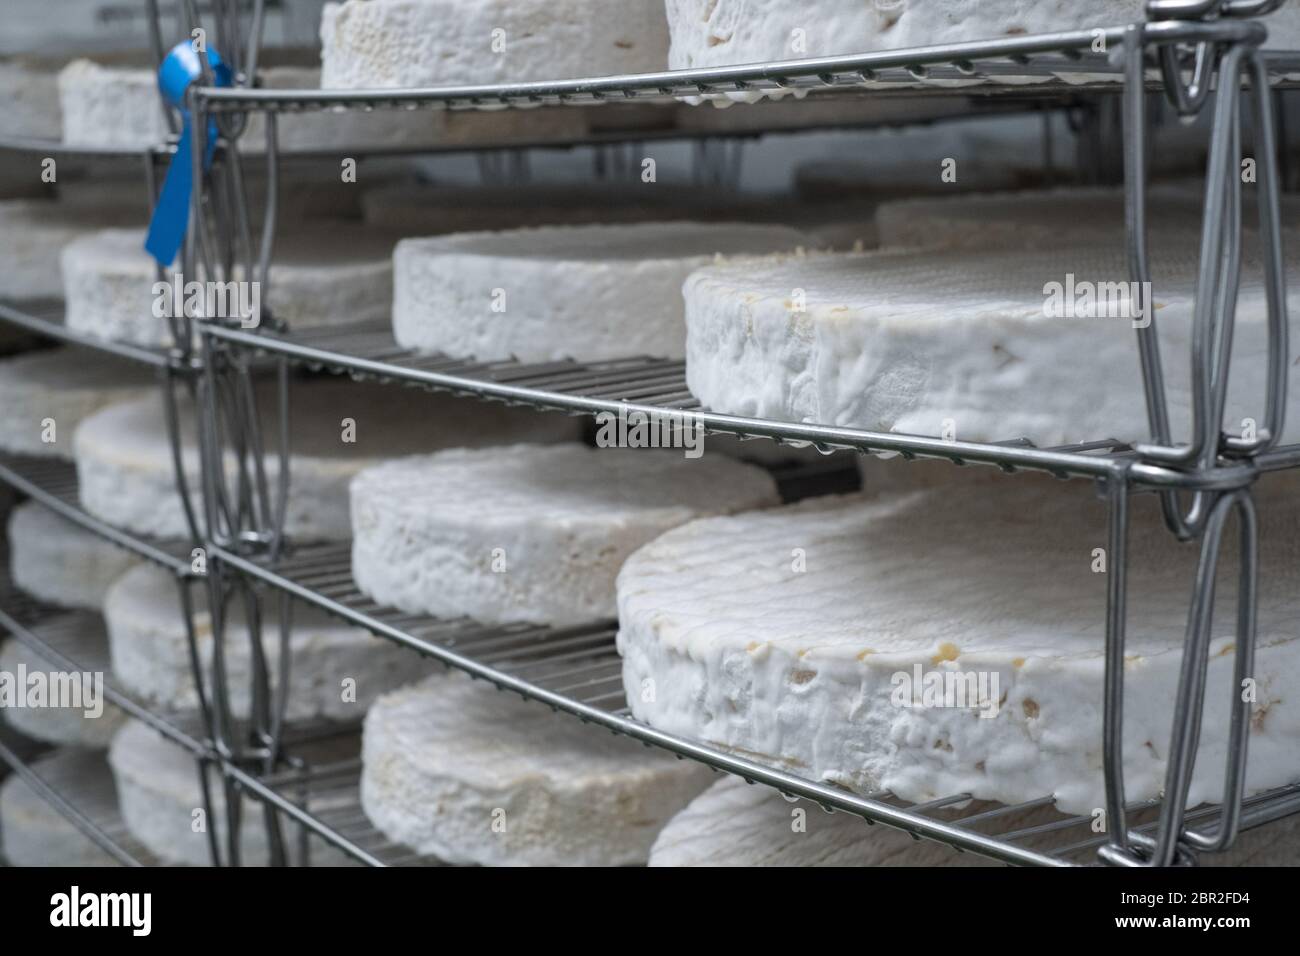 Baron Bigod Brie-de-Meaux style cheeses maturing at Fen Farm Dairy in Suffolk Stock Photo